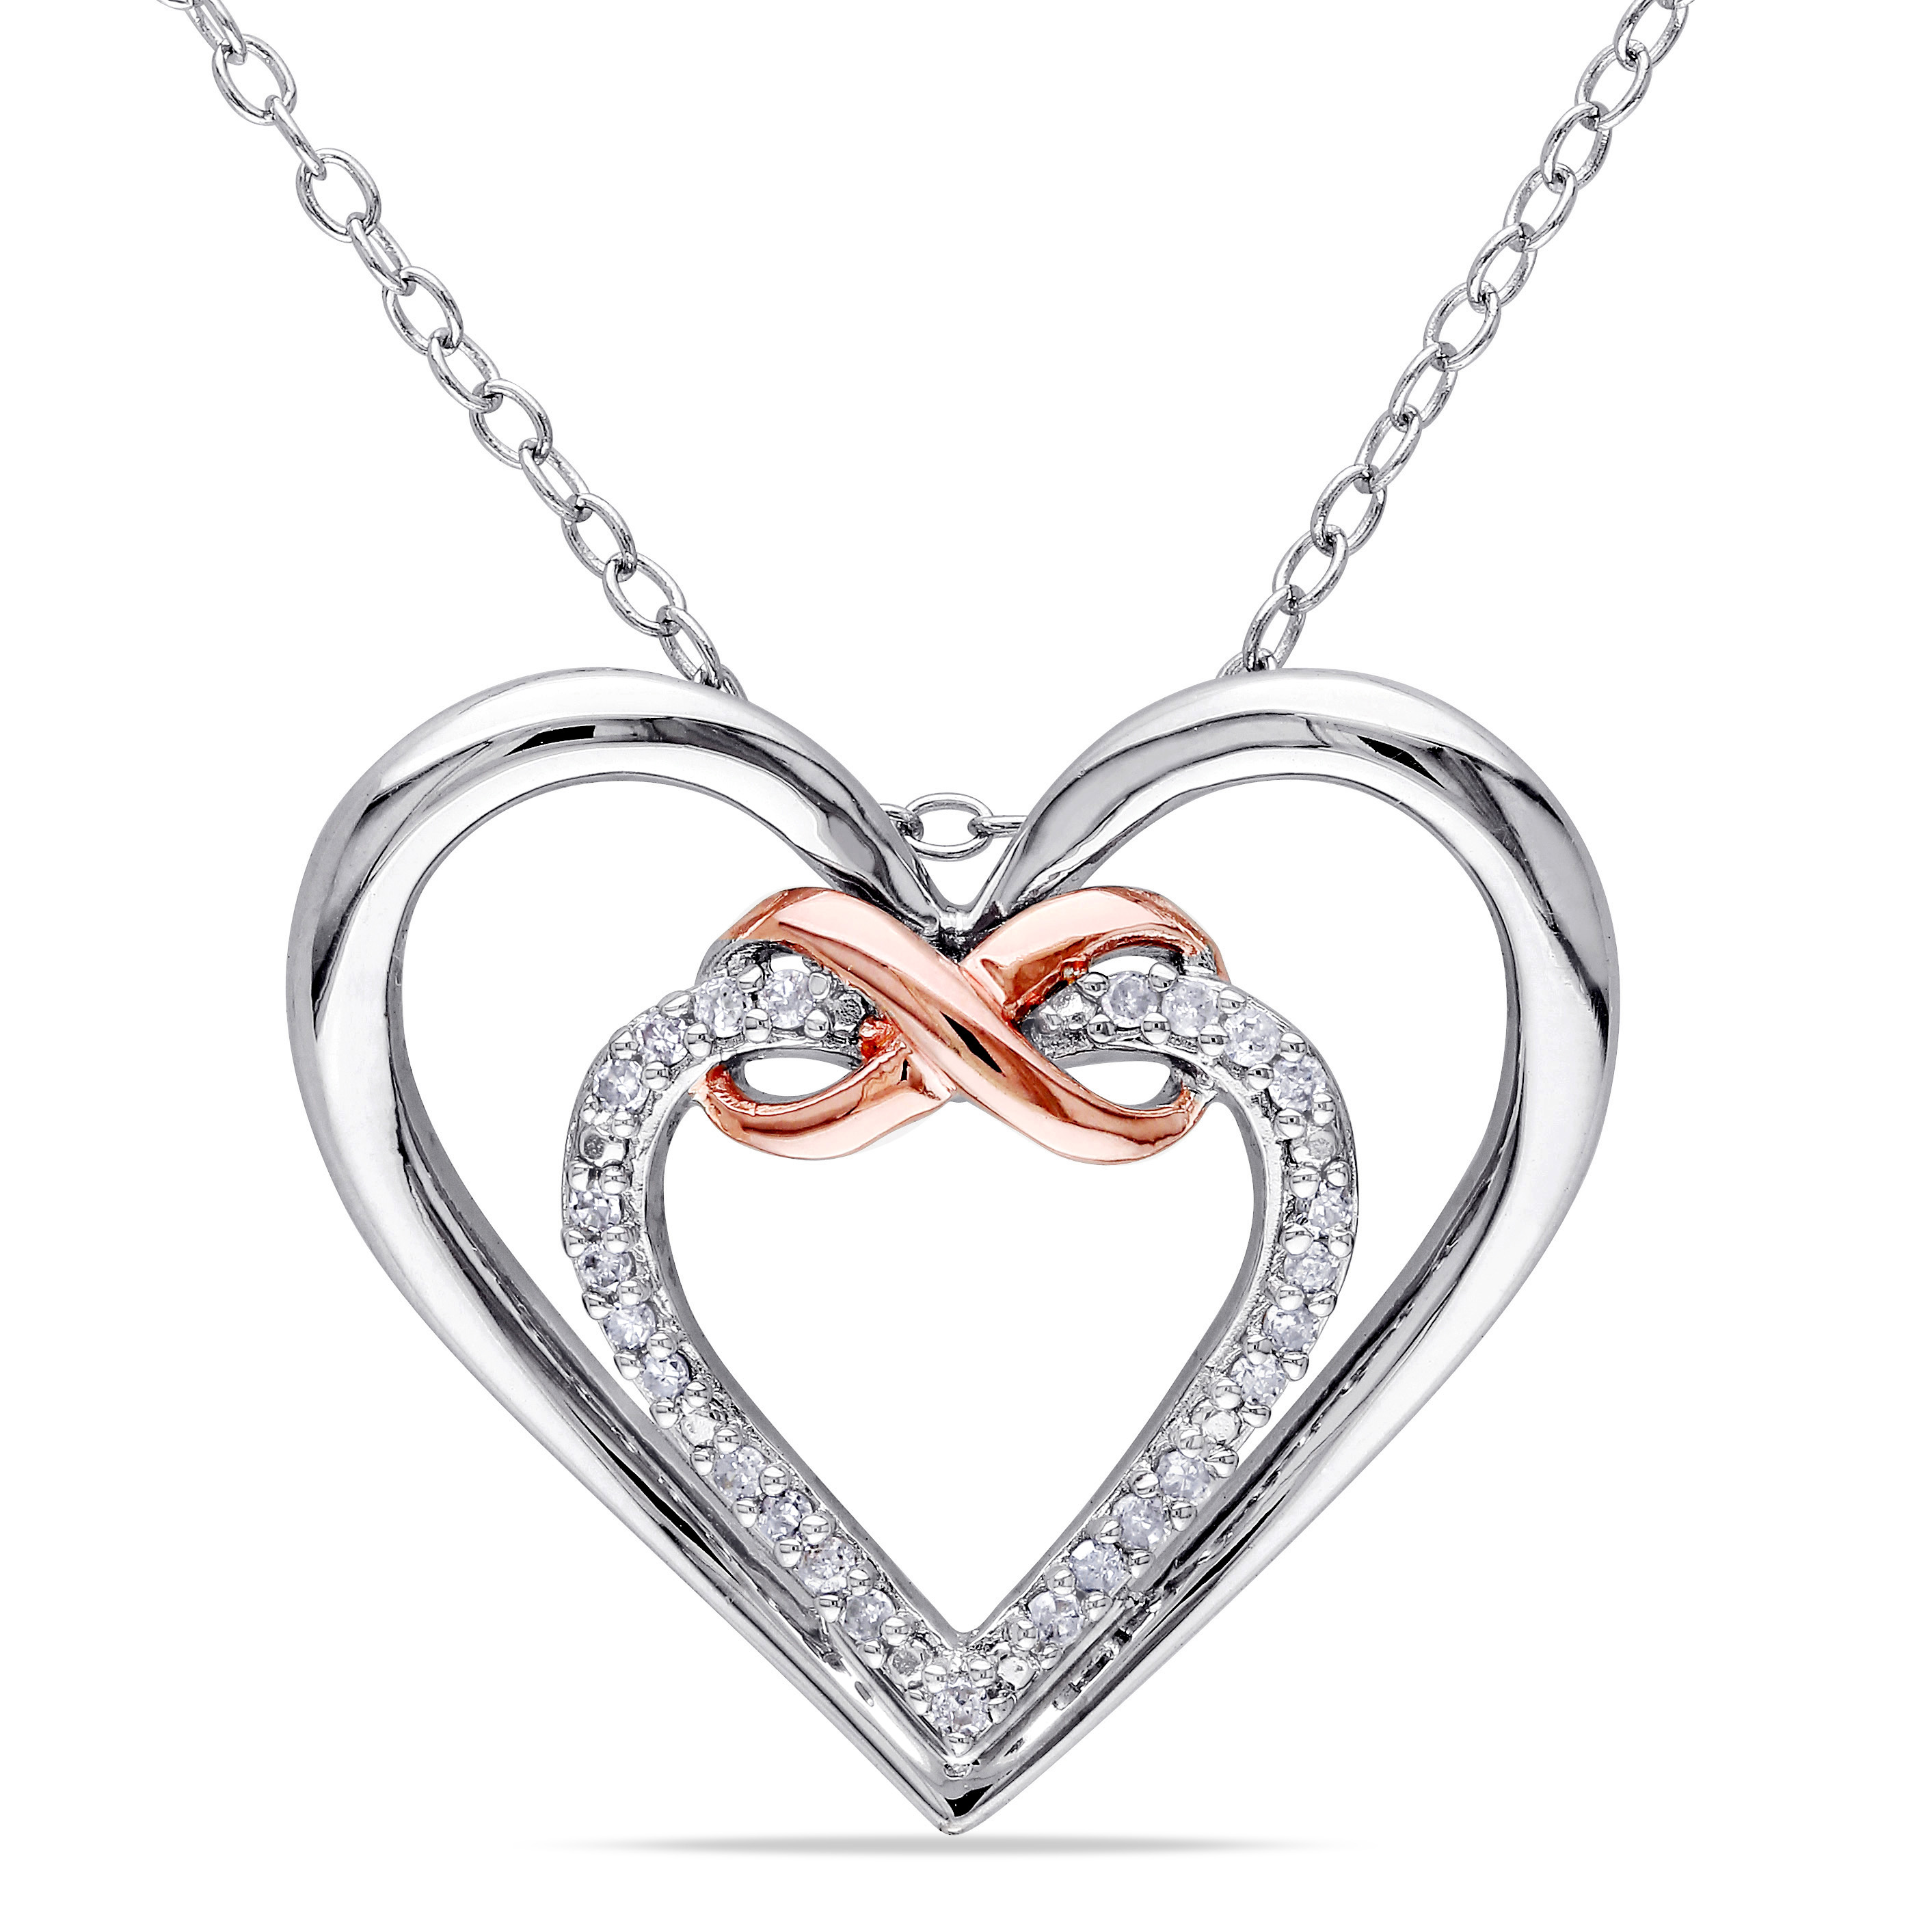 1/10 CT TW Diamond Infinity Heart Pendant with Chain in 2-Tone Pink and White Sterling Silver - 18 in.